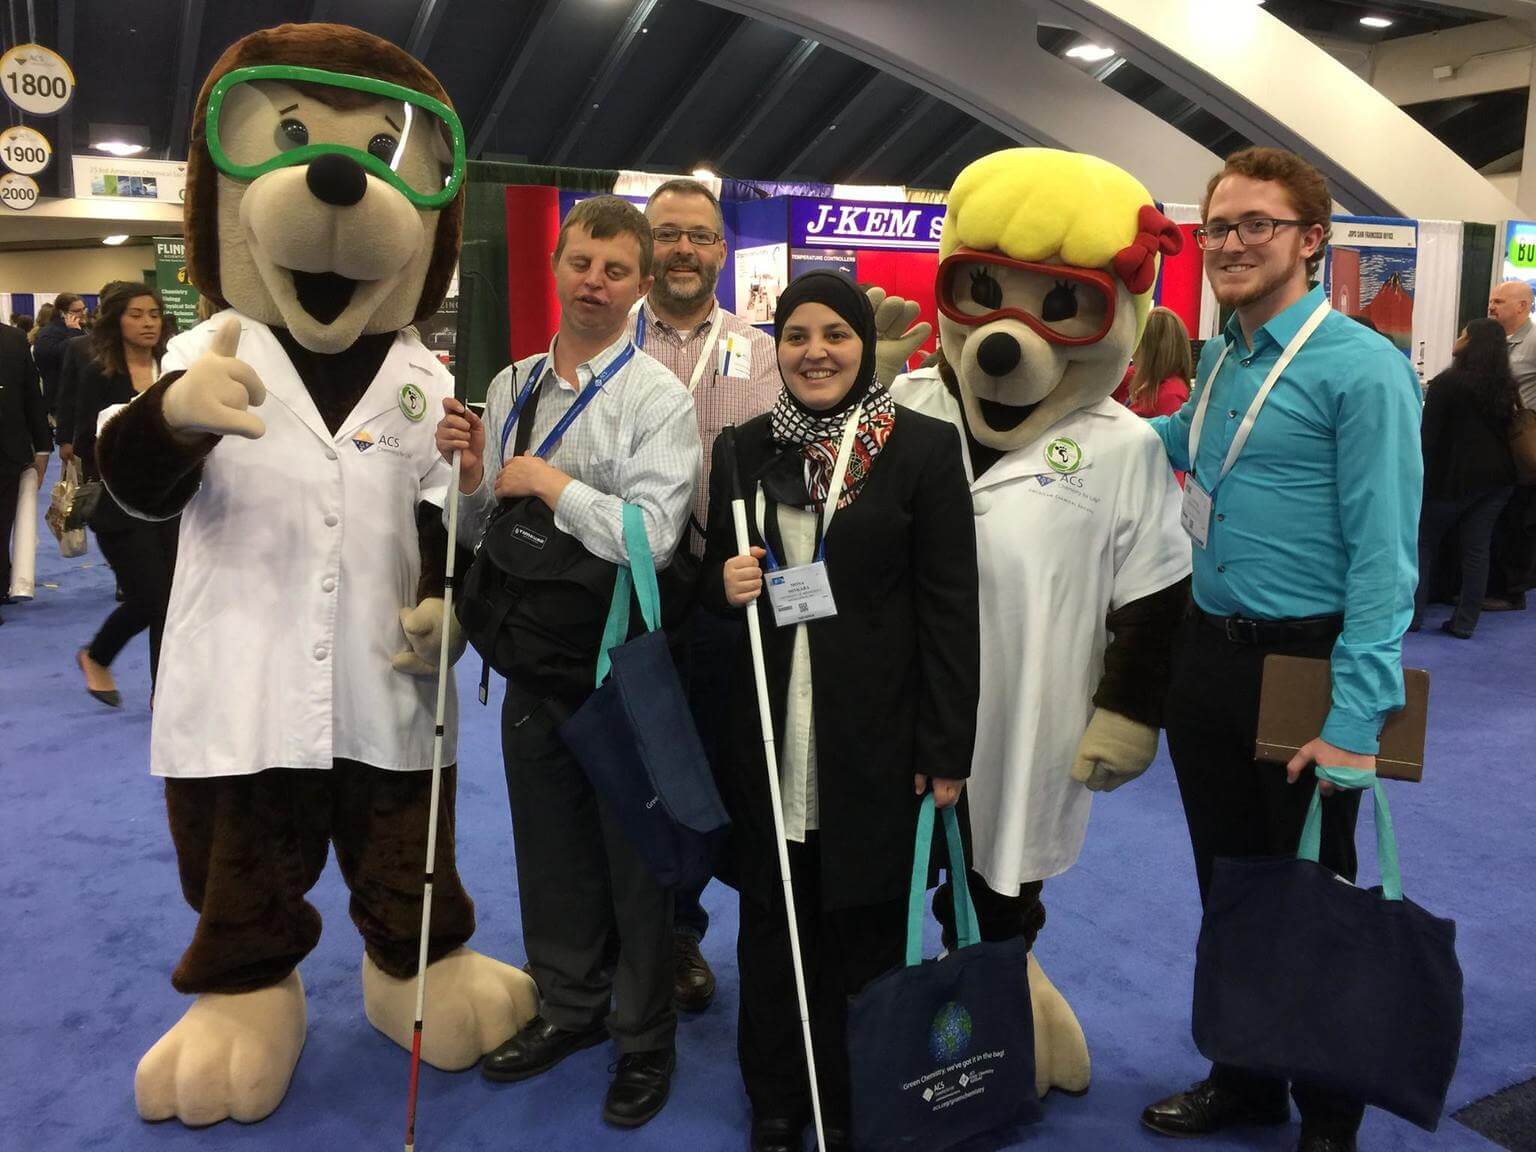 Mona Minkara and other chemists pose with ACS Mascots dressed in dog costumes. Mona and the chemist next to her both hold their canes.